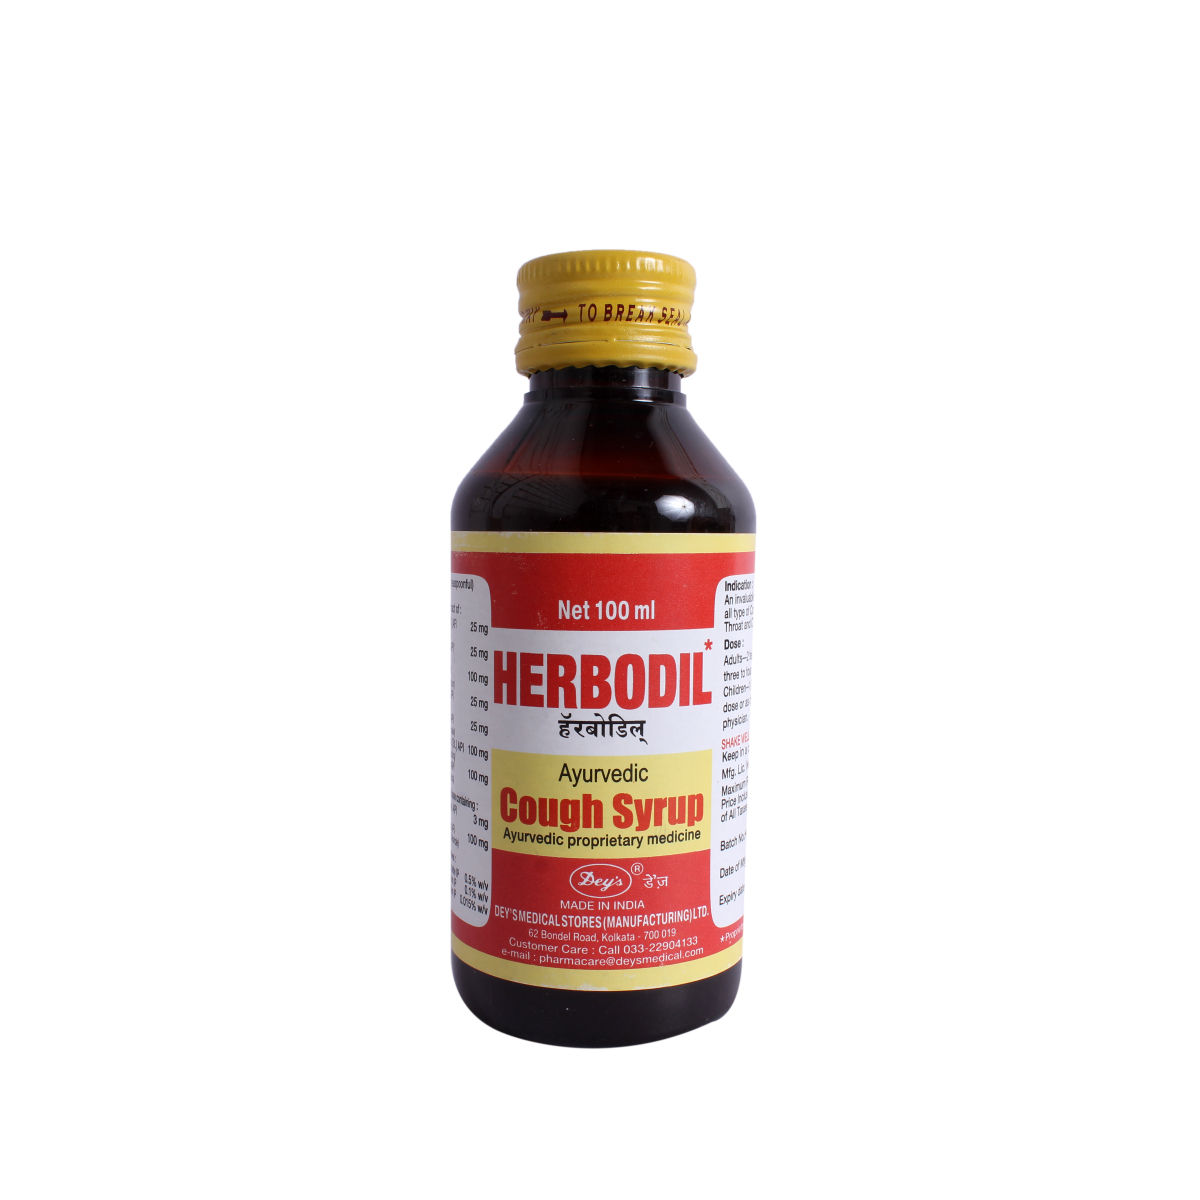 Buy Herbodil Cough Syrup, 110 ml Online